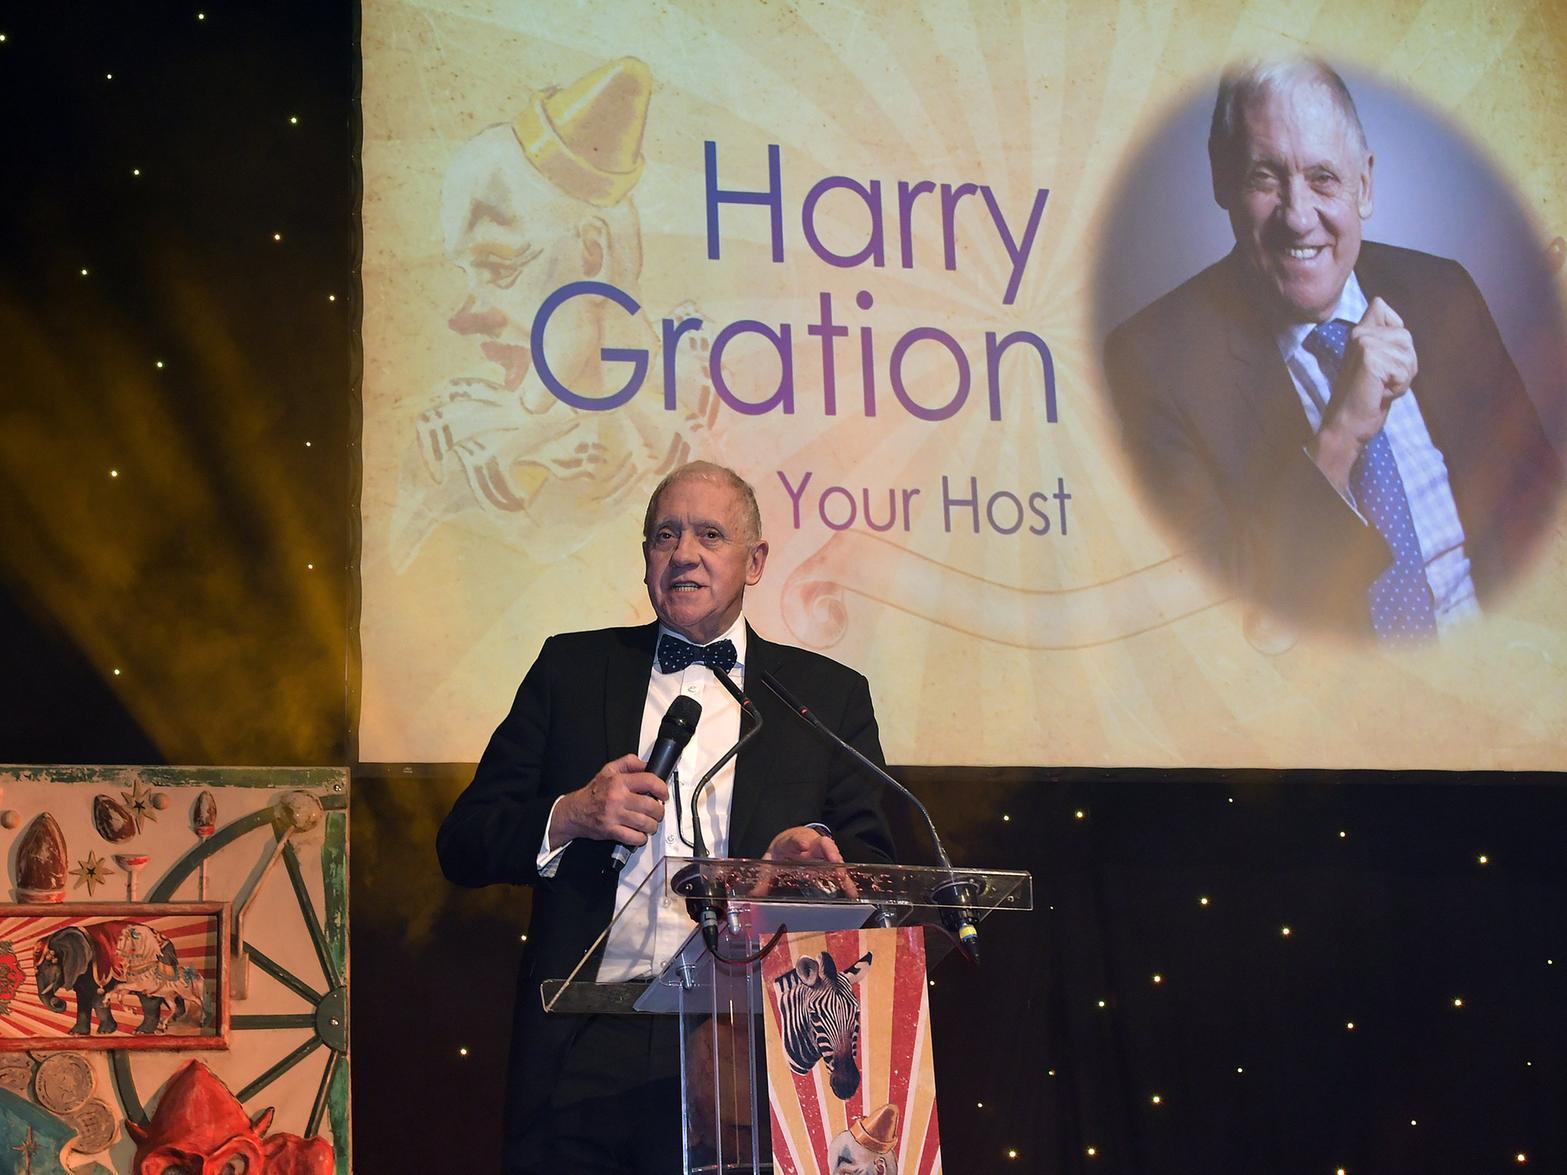 Host Harry Gration on the stage.